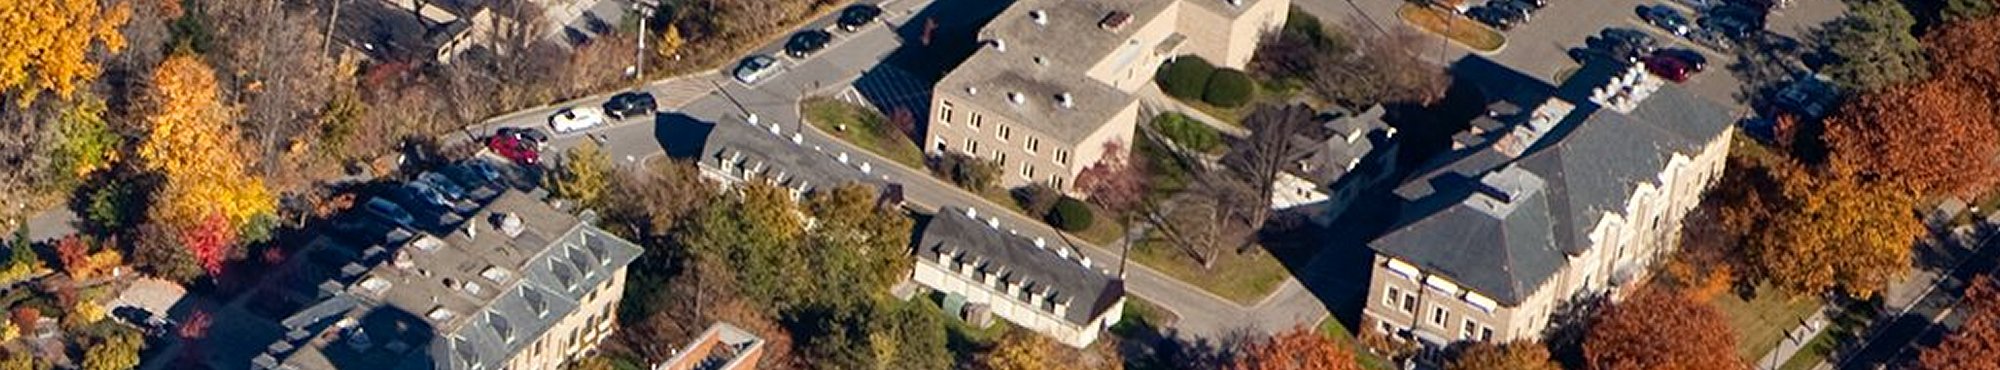 Aerial view of Rice Hall